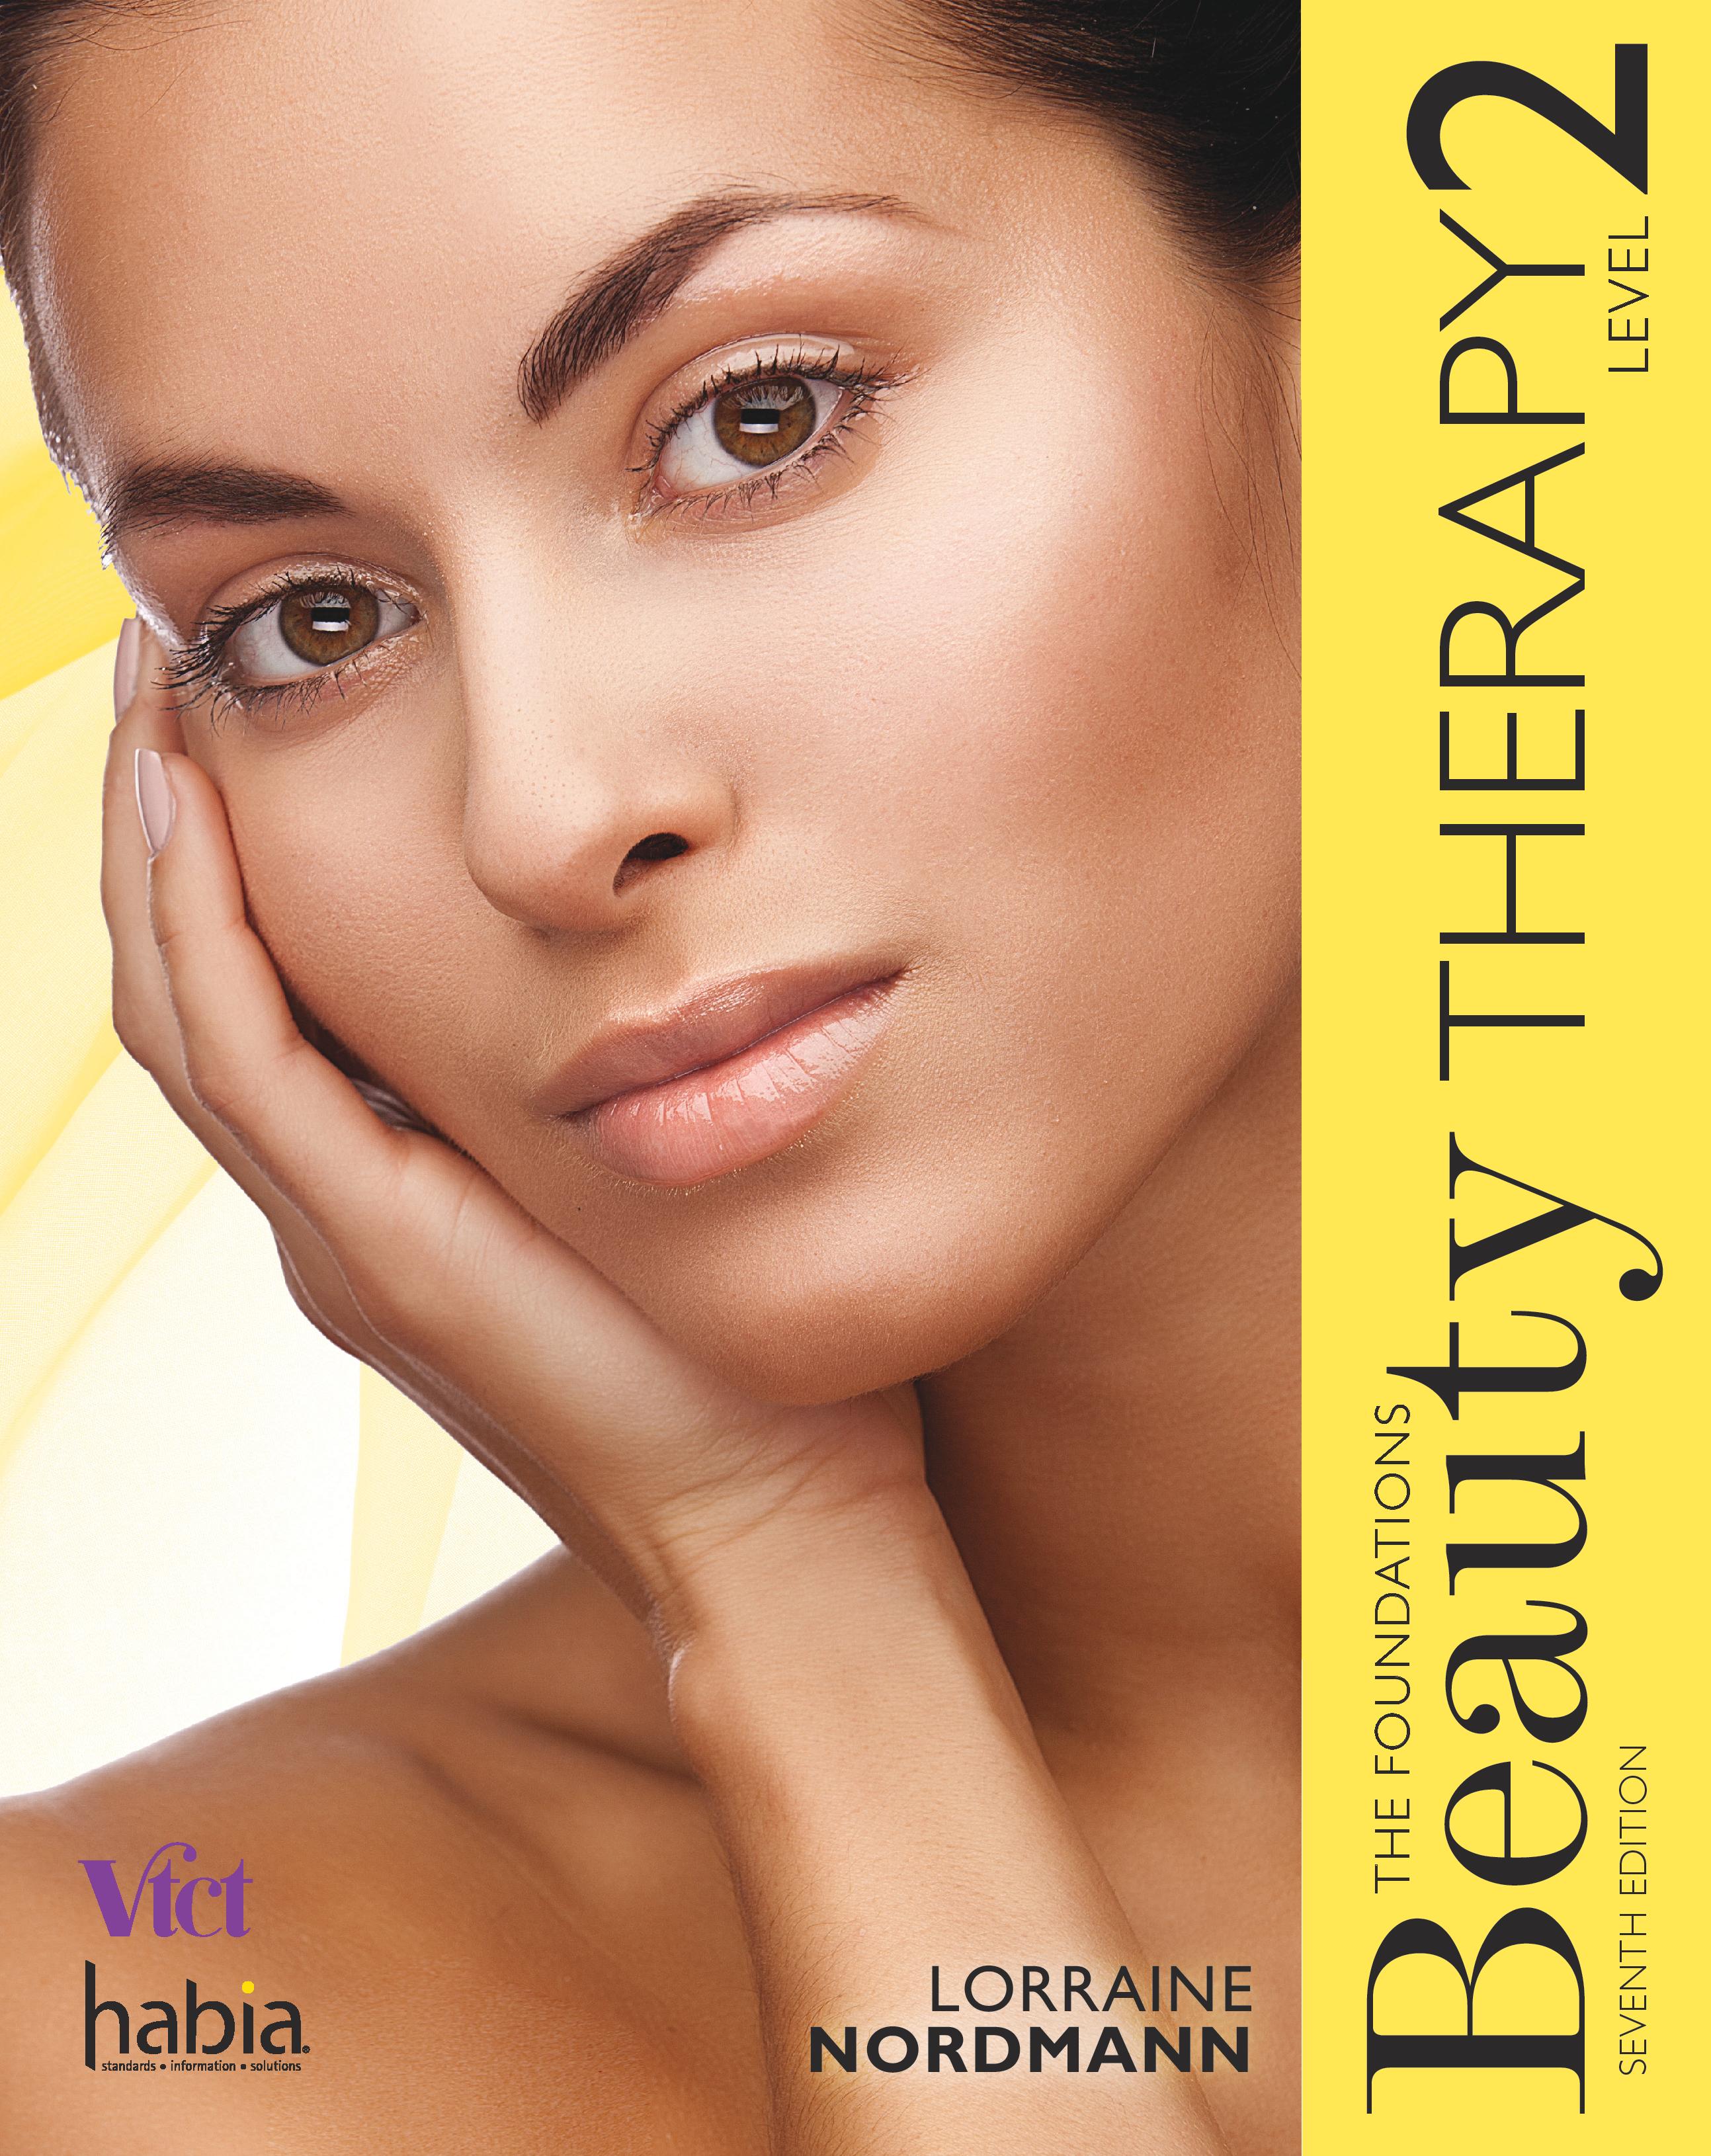 Beauty Therapy the Foundations Level 2, 7th edition by Lorraine Nordmann